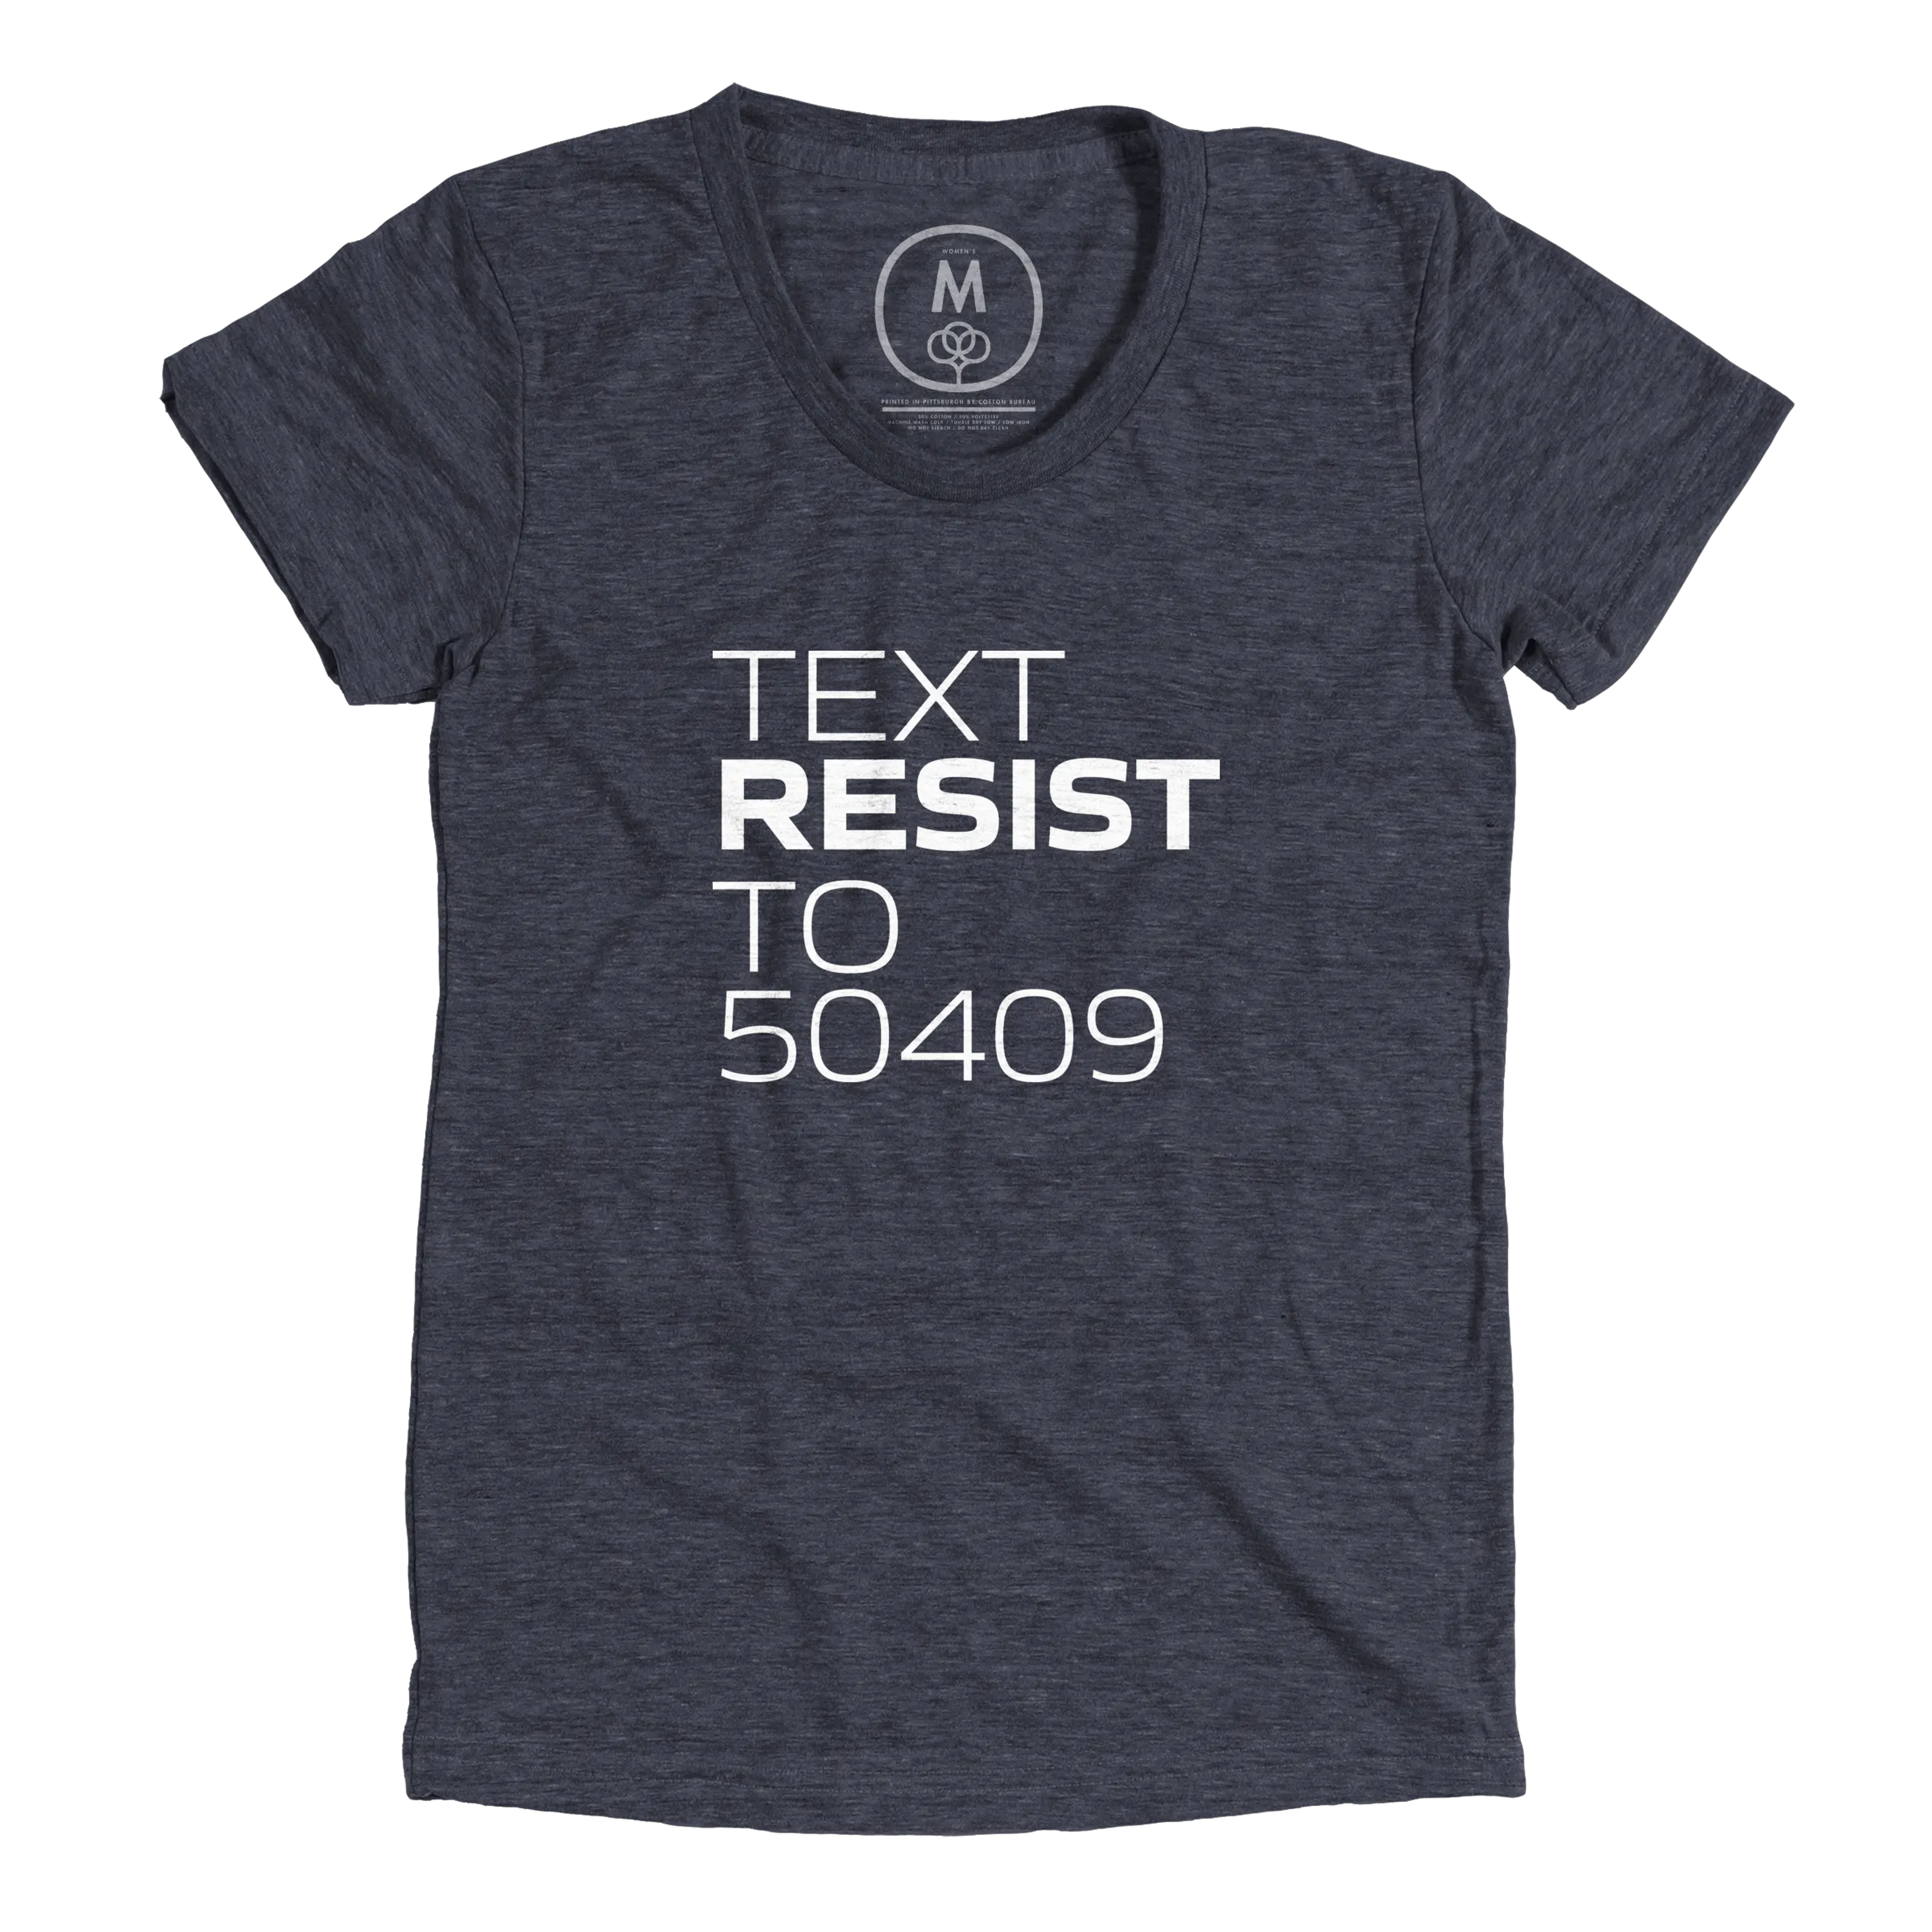 Women's v-neck tee shirt with "text resist to 50409" written across the chest